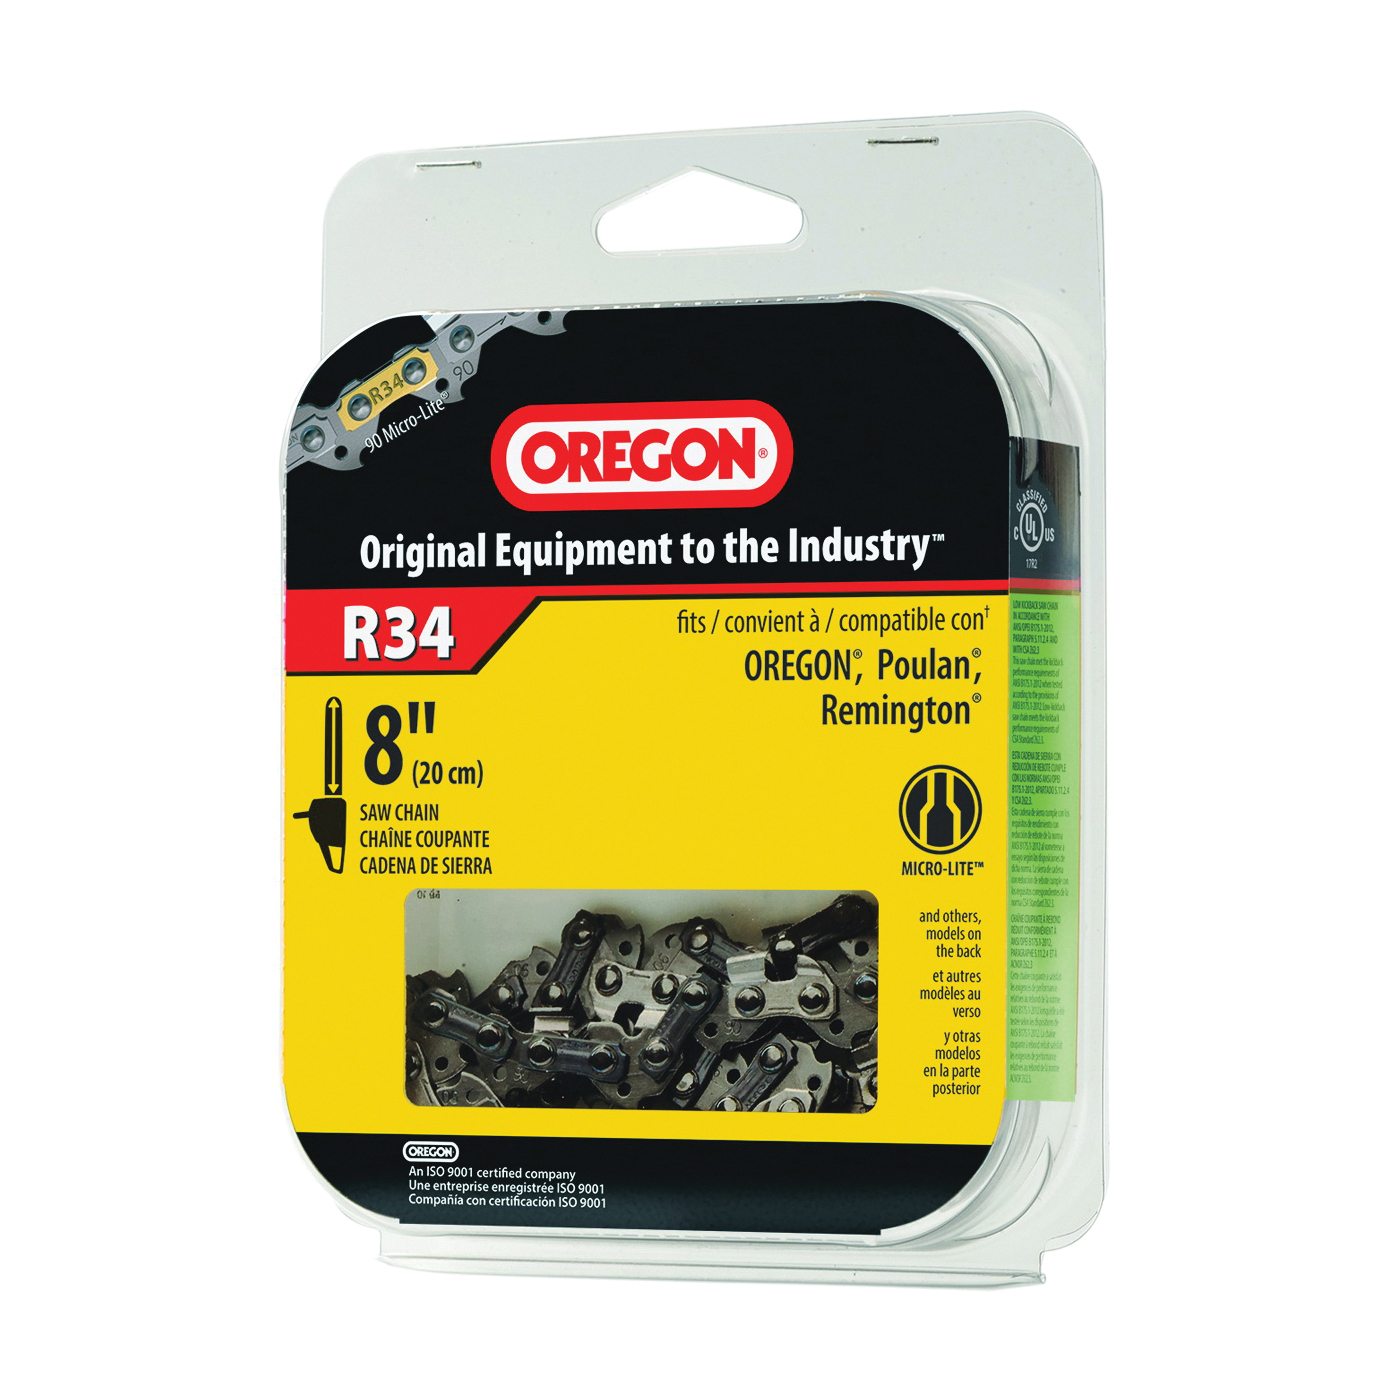 Oregon R34 Chainsaw Chain, 8 in L Bar, 0.043 Gauge, 3/8 in TPI/Pitch, 34-Link - 2